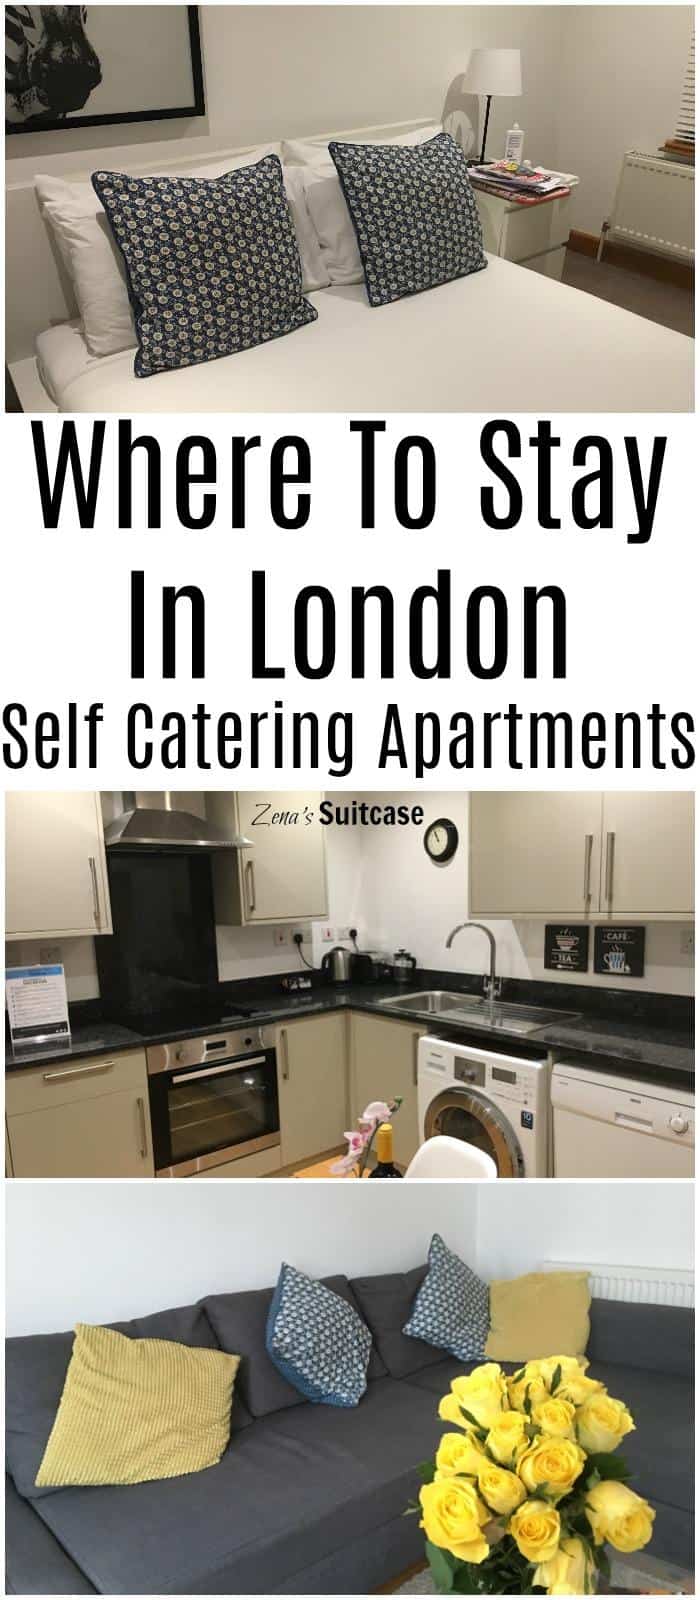 Where to stay in London - self catering apartments are a great option for city breaks or weekend visits to the city